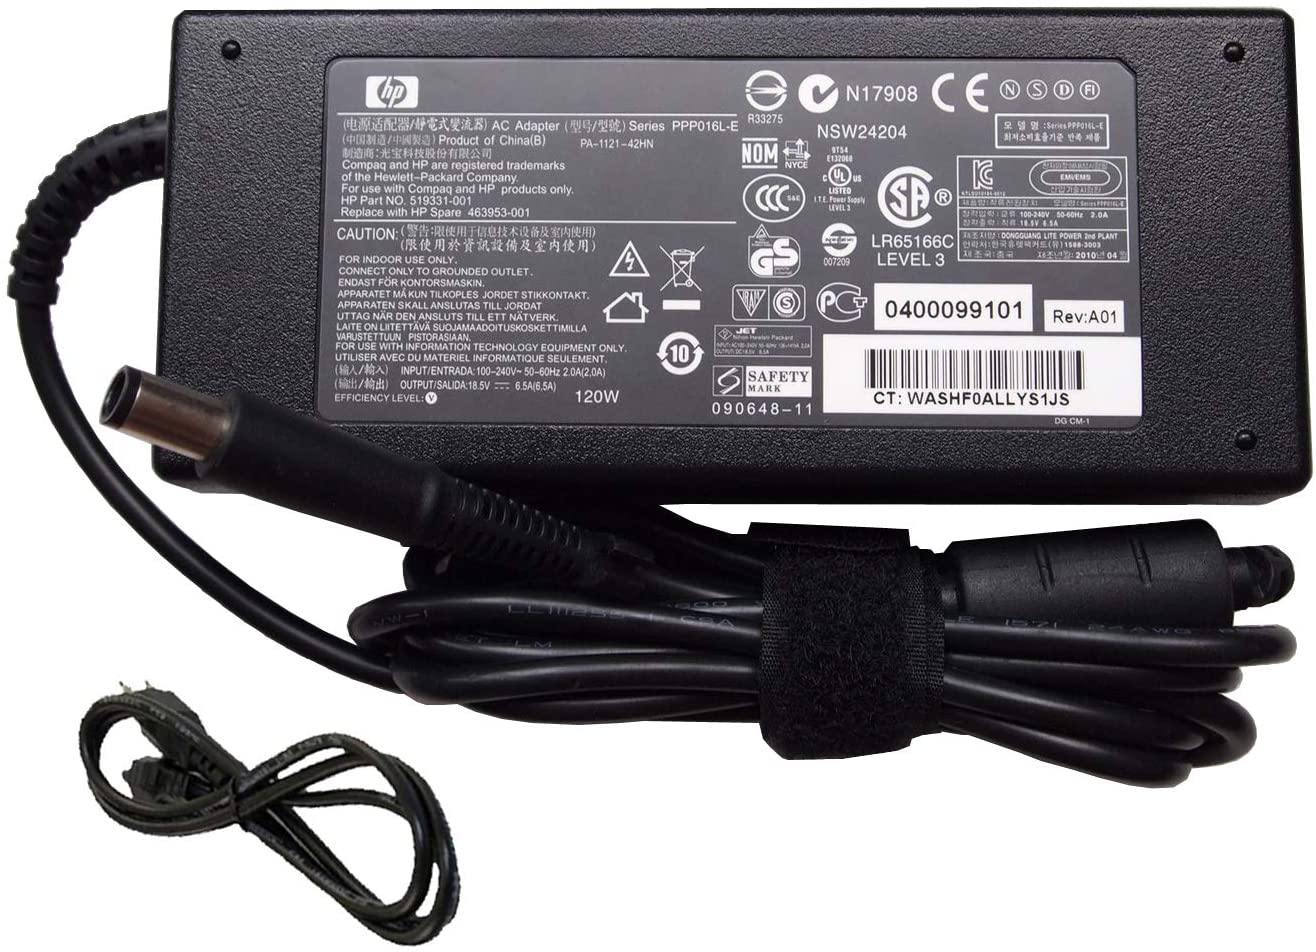 UPBRIGHT HP/COMPAQ ORIGINAL 120W SMART AC ADAPTER POWER CORD/SUPPLY BATTERY CABLE CHARGER OEM 18.5V 6.5A 120W Replacement AC Adapter, For HP Promo 8570w i5-3360M 15.6 500/8GB PC, B8V81UT, B8V81UTR, HP - image 2 of 5